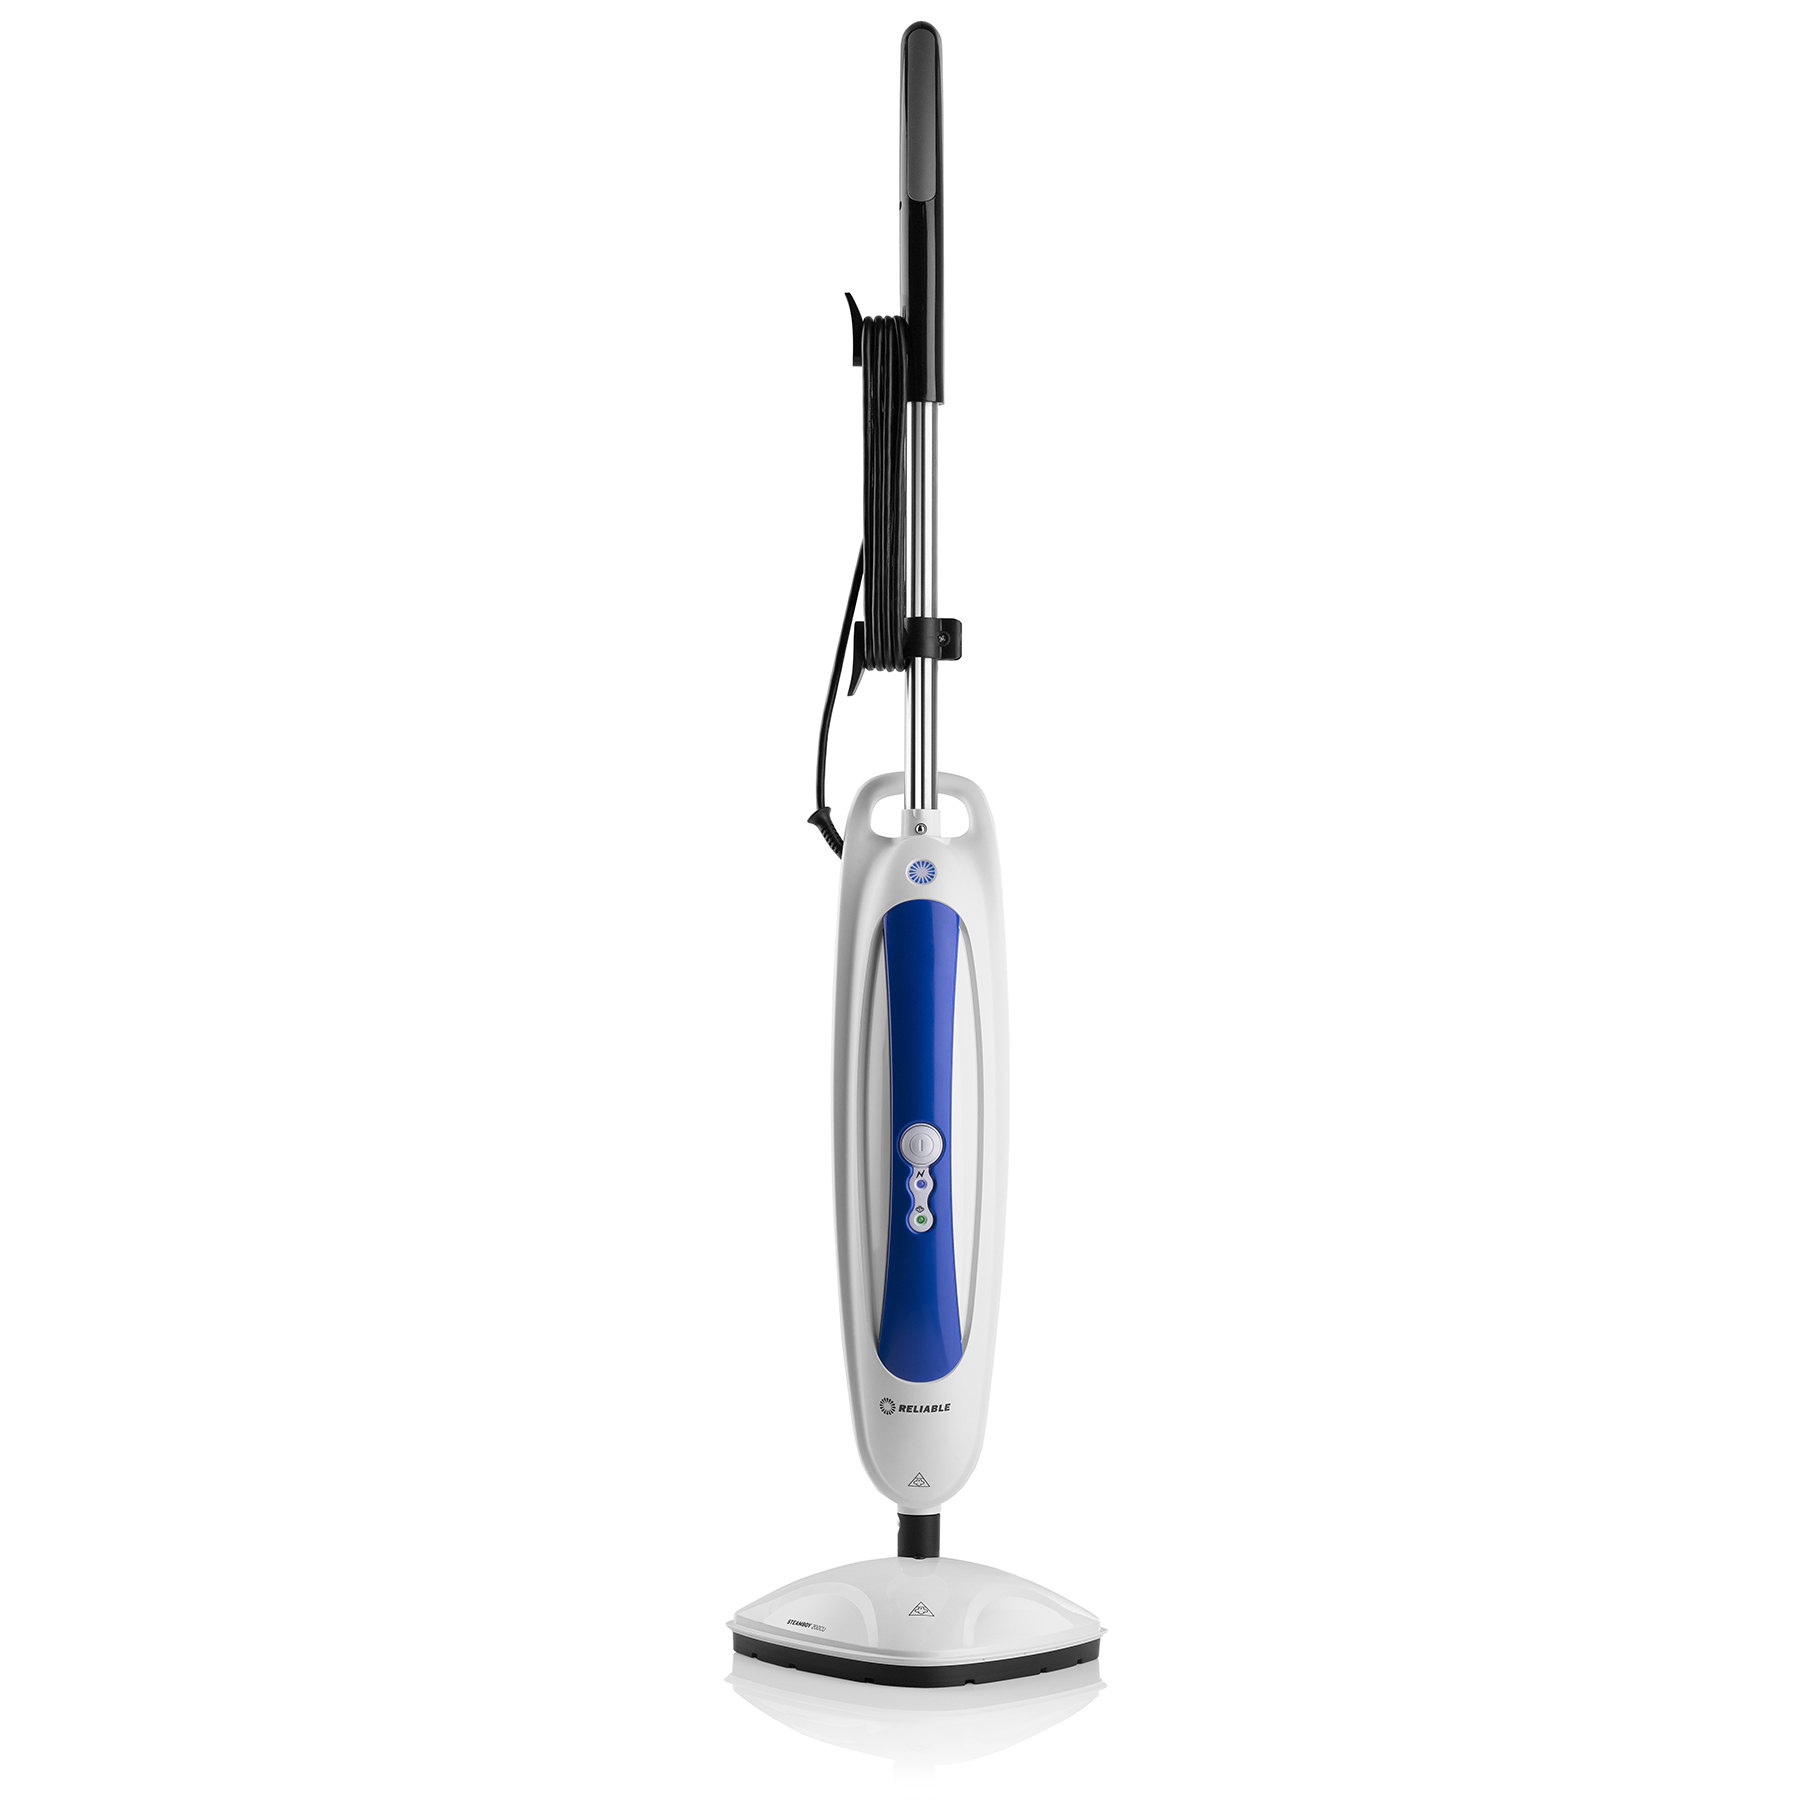 Reliable - 8000CD Automatic Dental Steam Cleaner